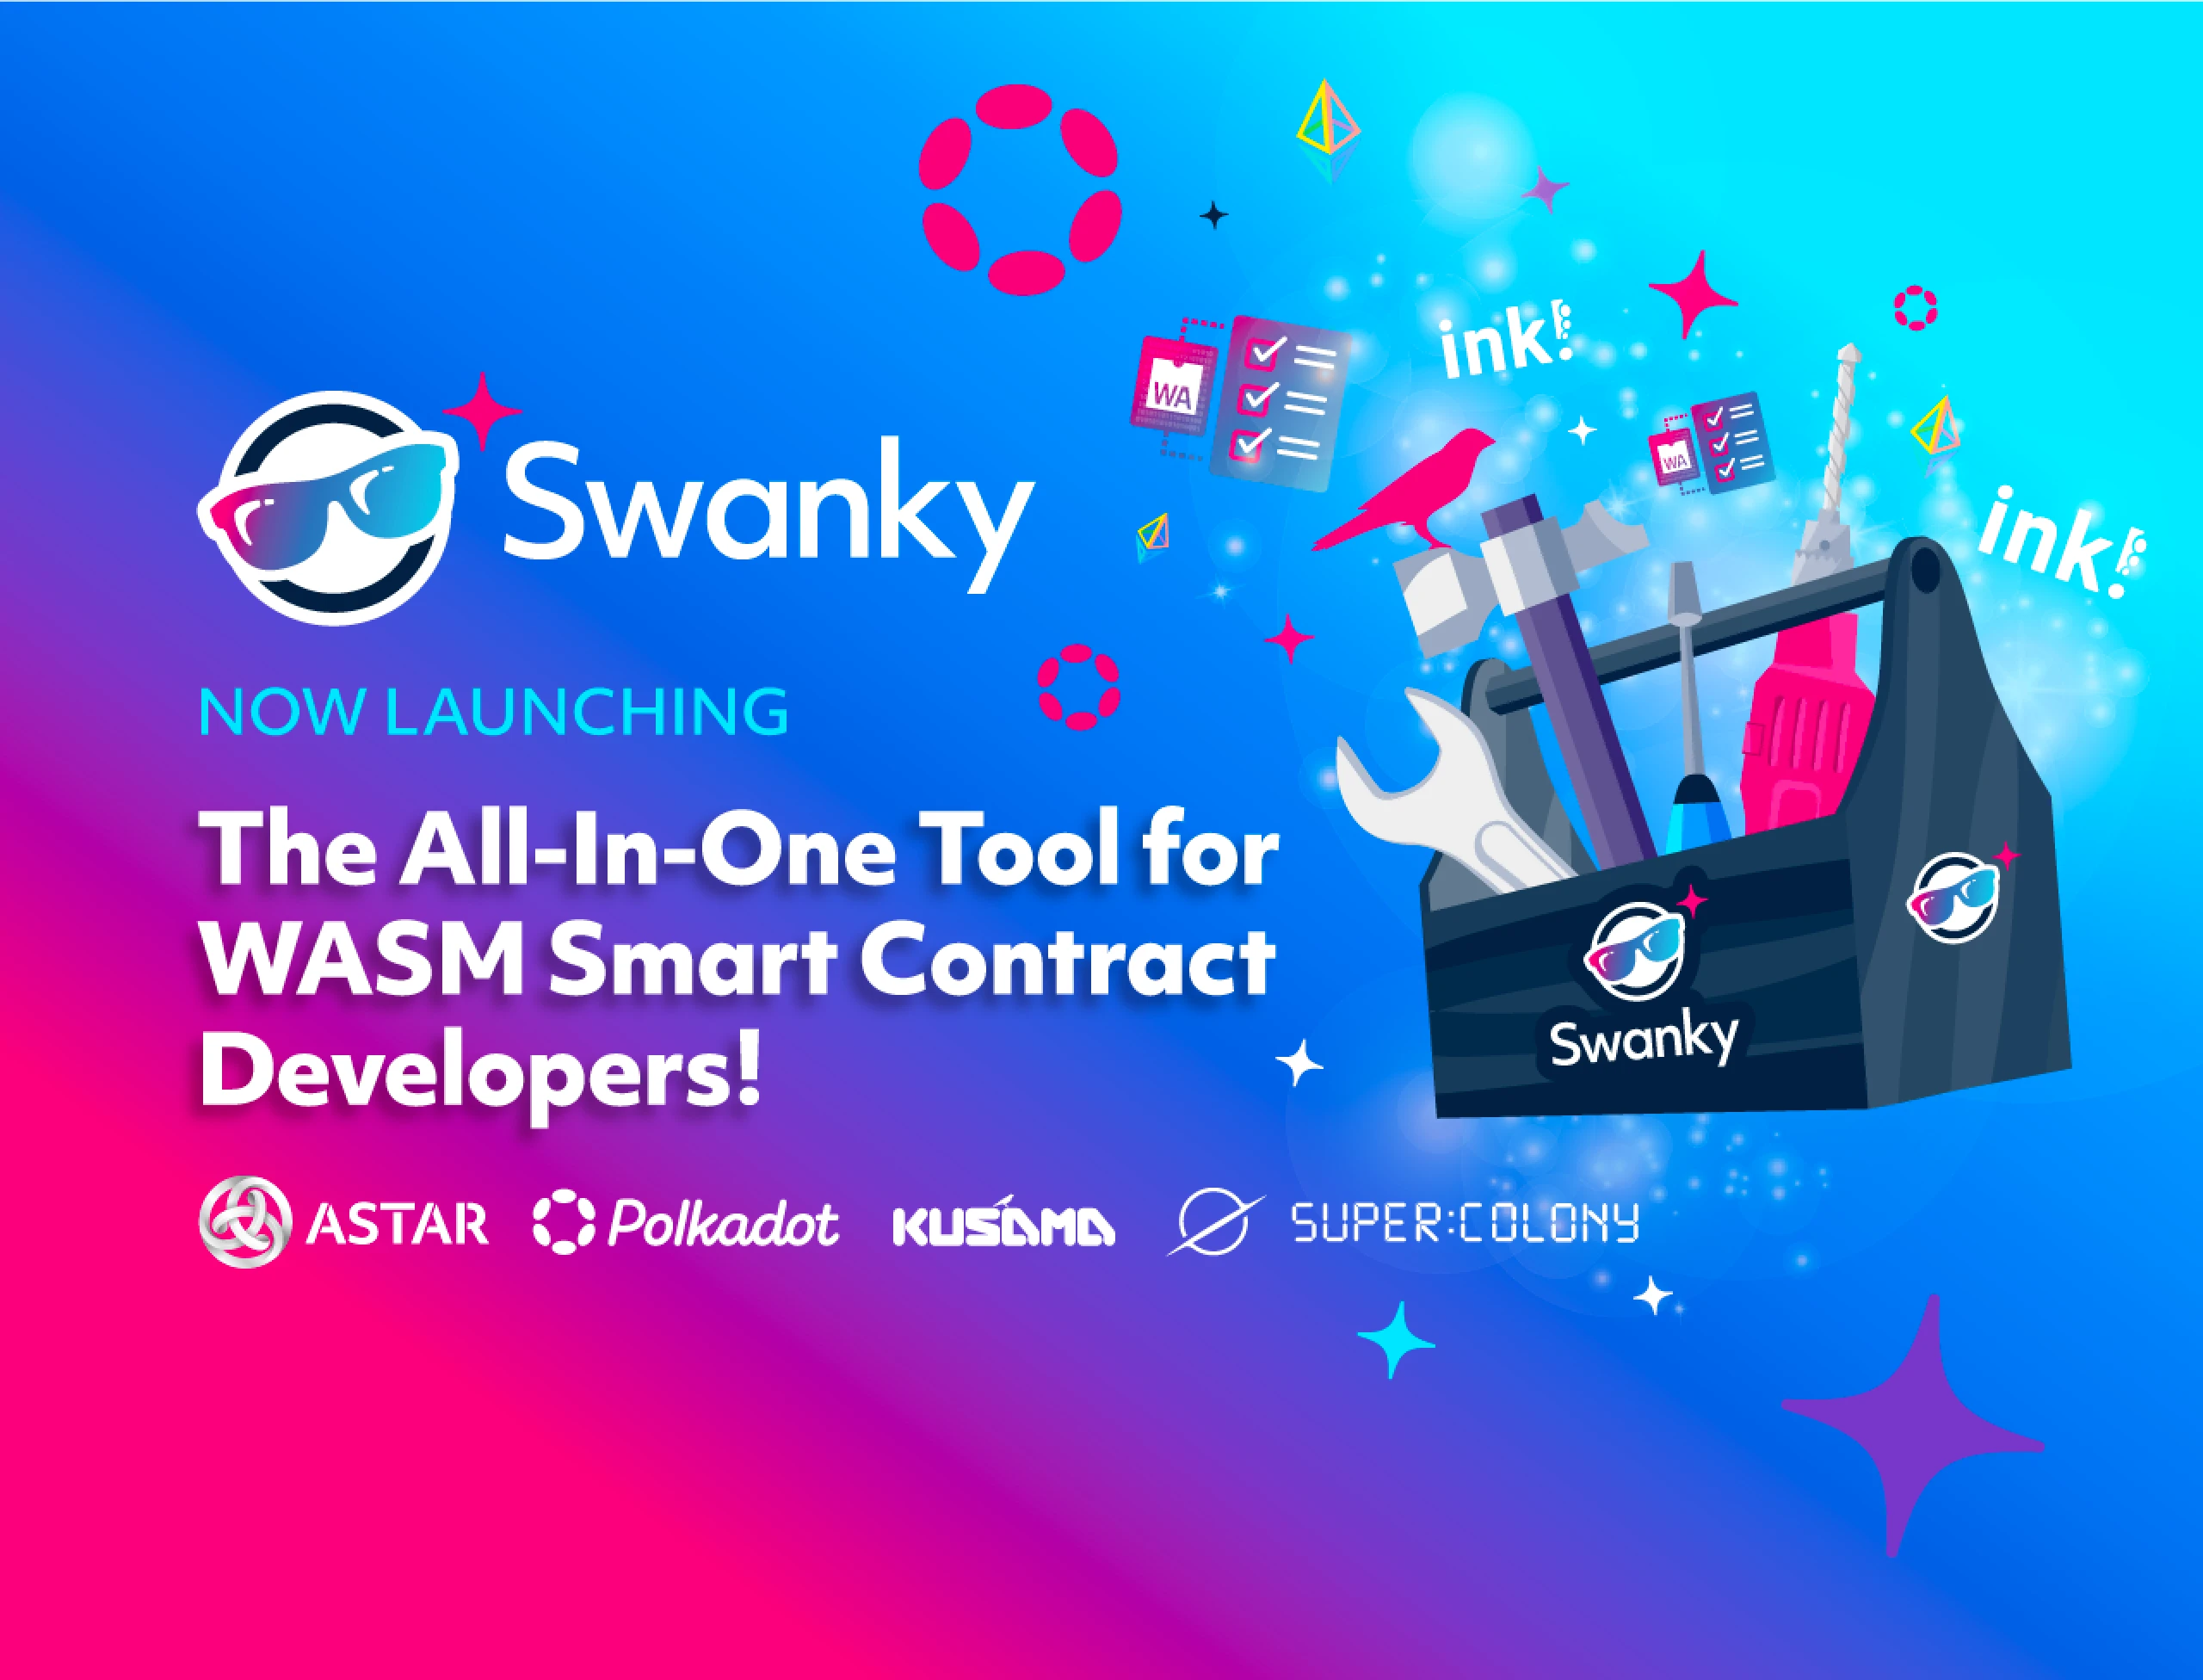 Swanky: The All-in-One WASM Tool